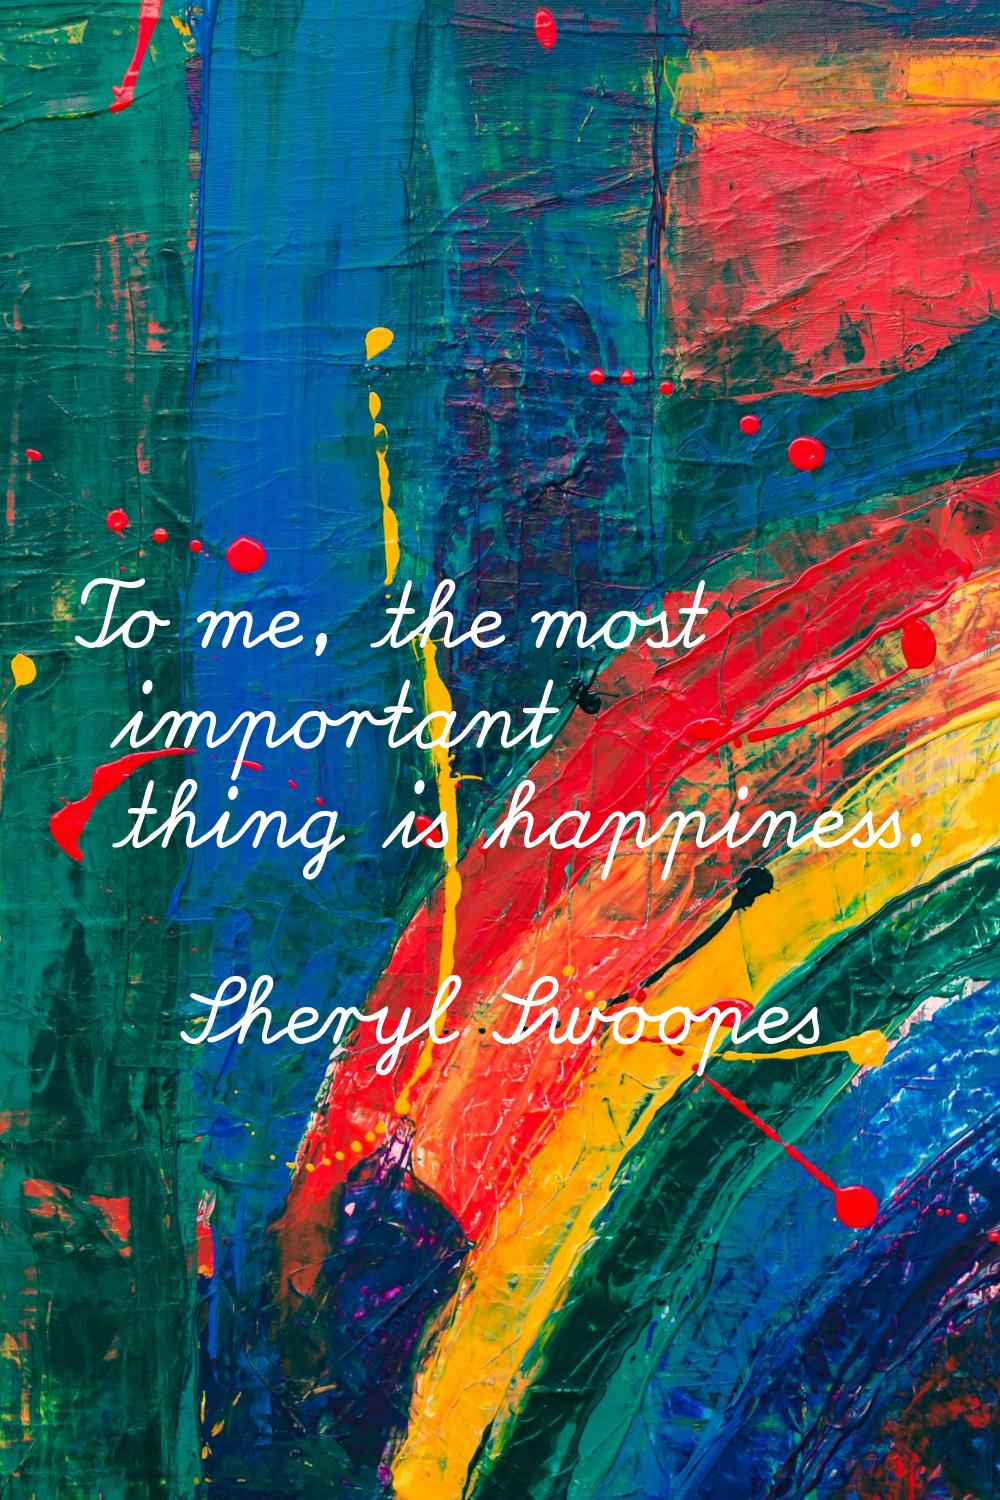 To me, the most important thing is happiness.